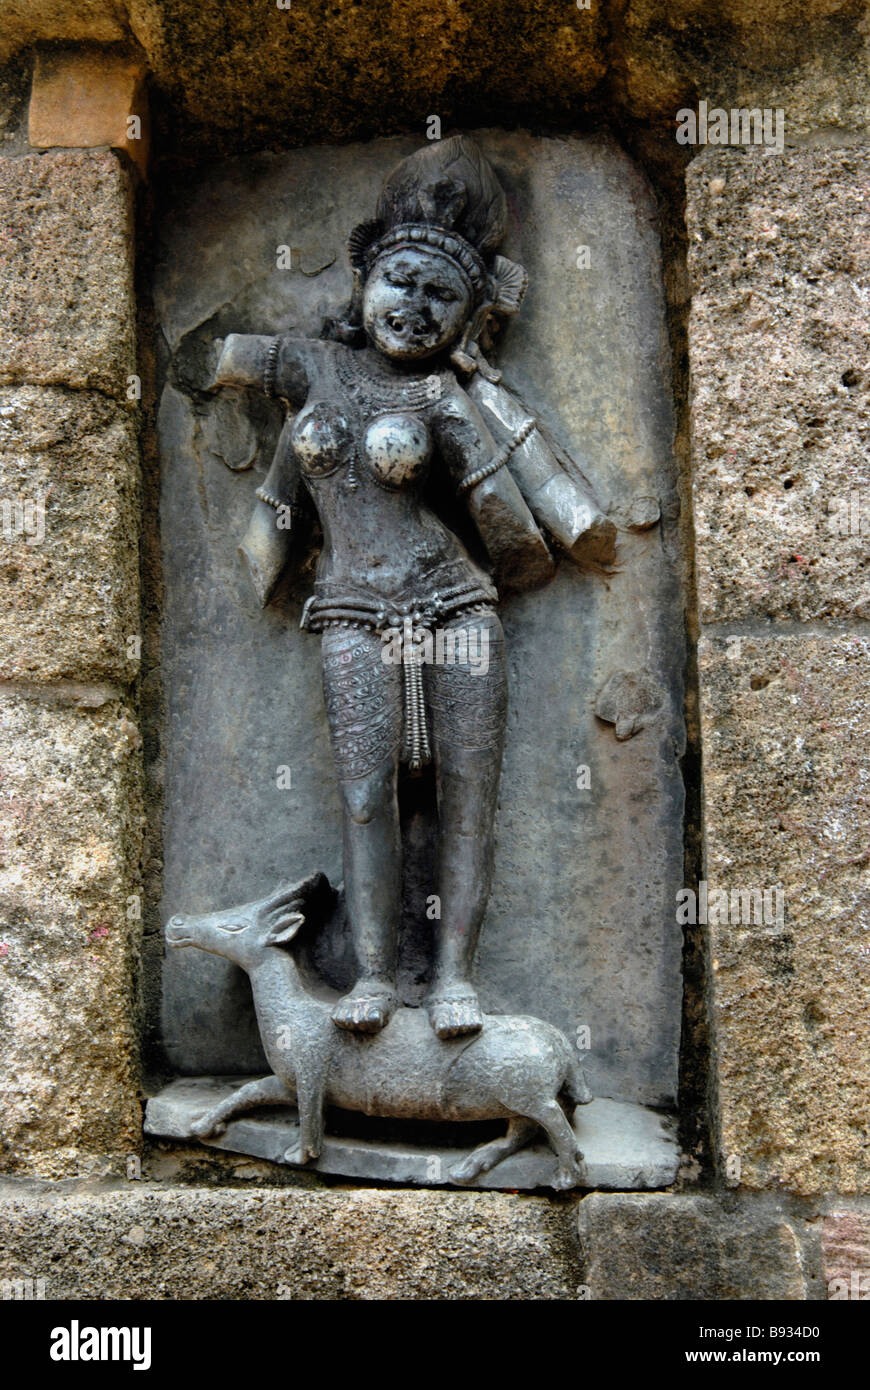 Yogini Temple, Hirapur, Yogini No.62  Vayu Veaeena. Four armed figure with a dancing pose. Braid of hair. Standing on a stag. Stock Photo